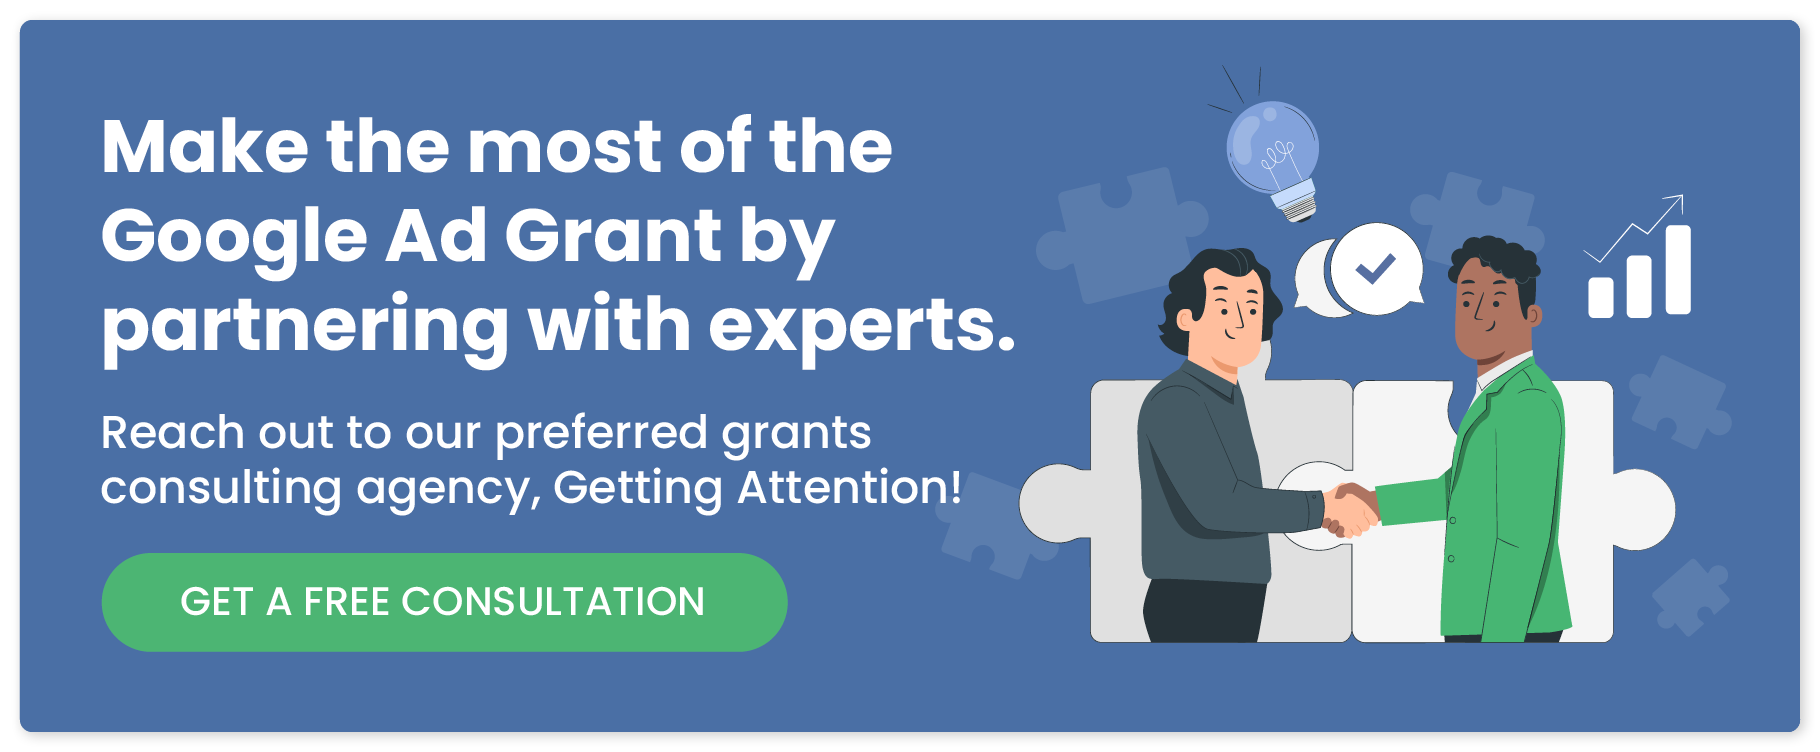 Make the most of the Google Ad Grant by partnering with experts. Reach out to our preferred grants consulting agency, Getting Attention!